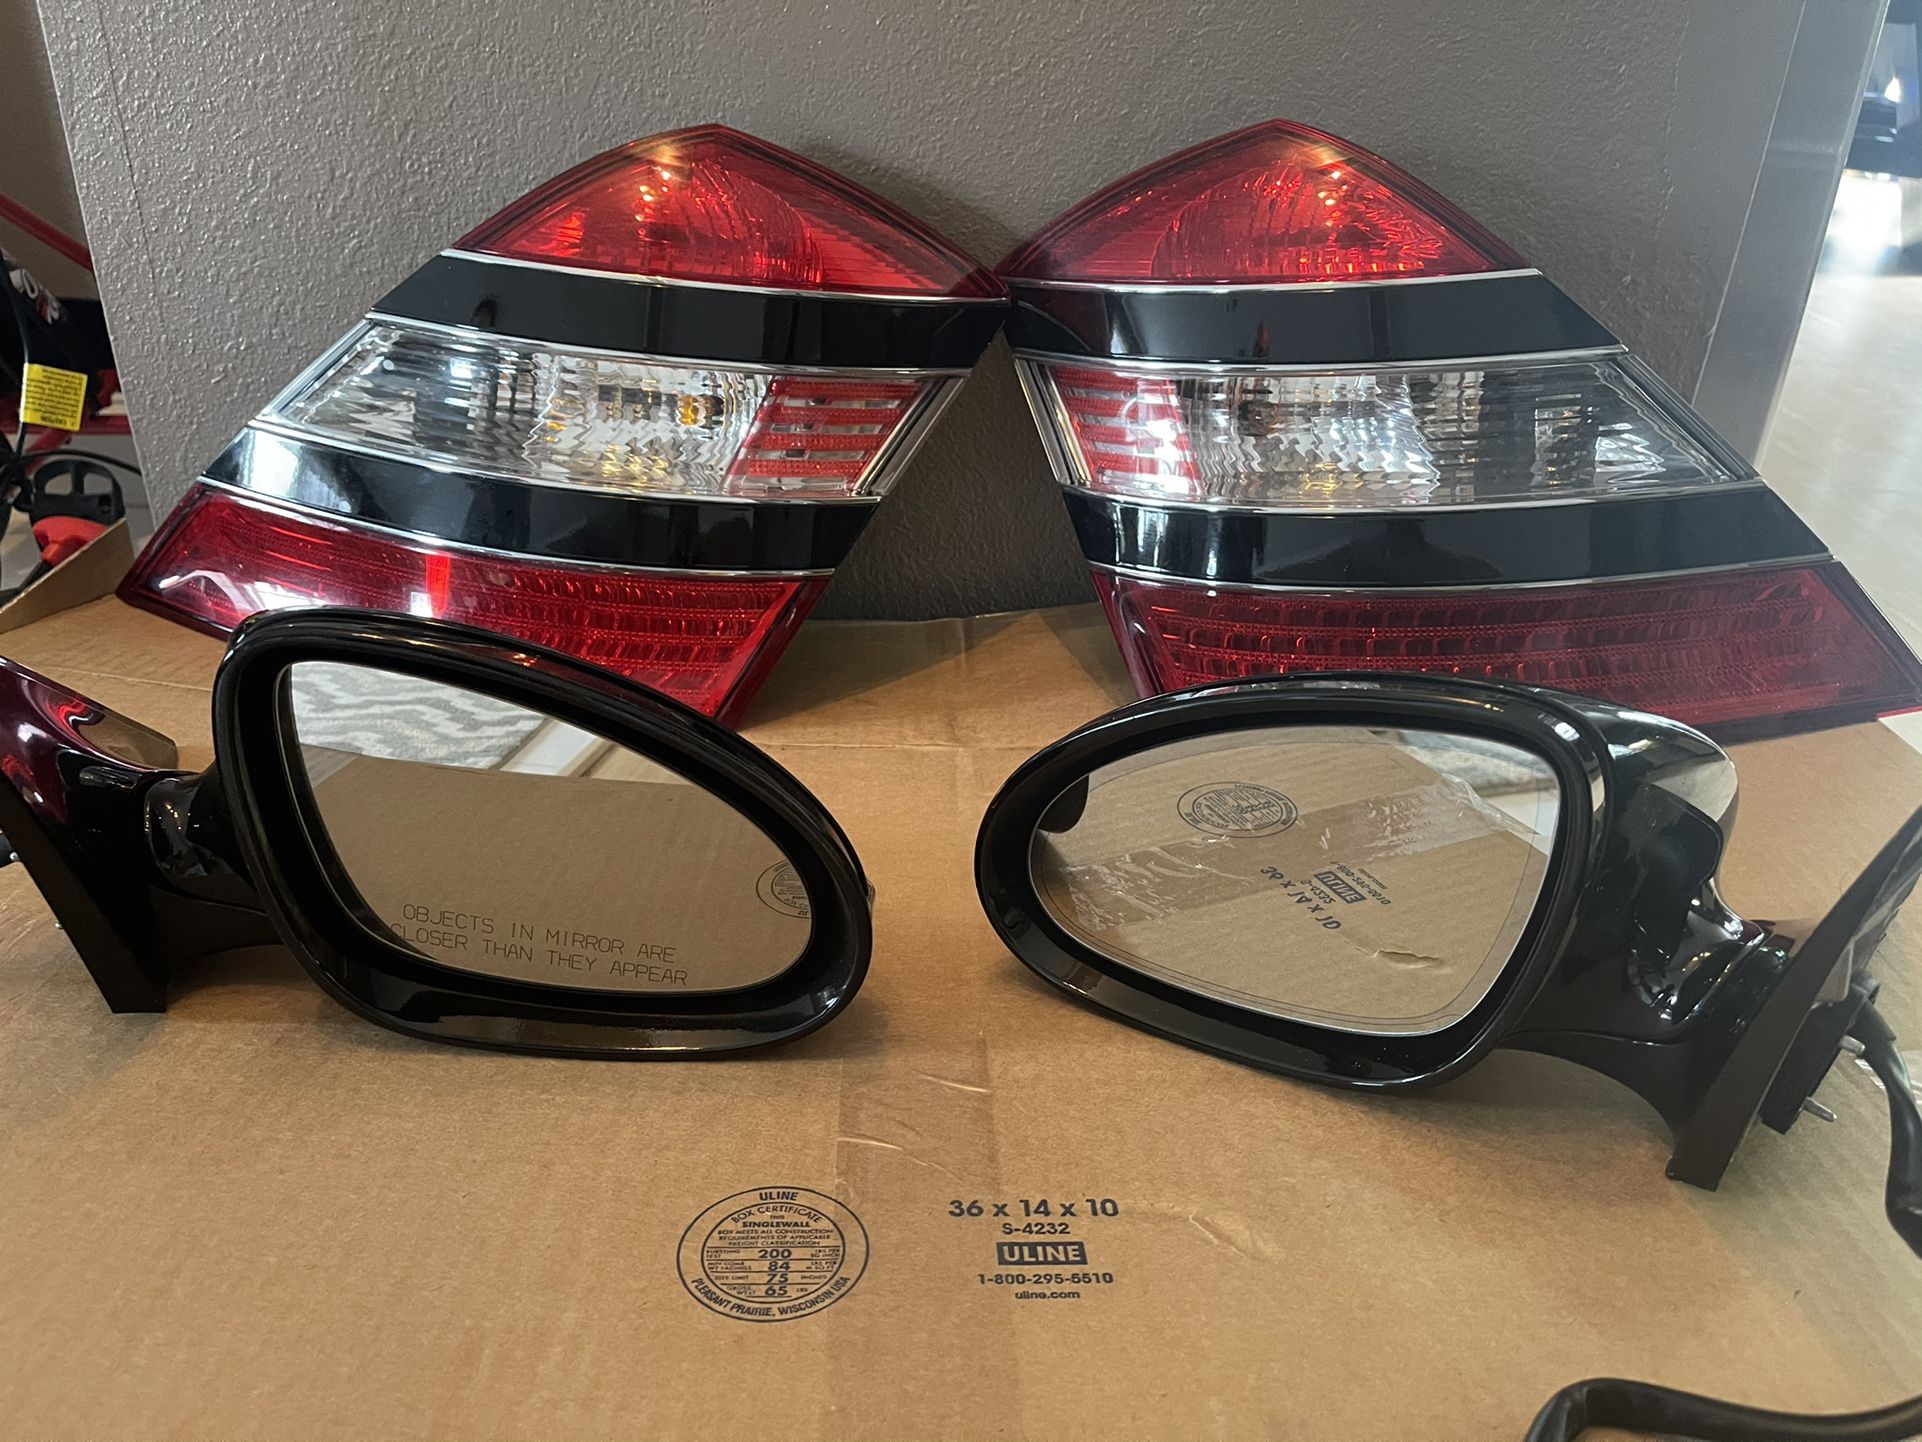 Mercedes S class Lamps 2006 And Mirrors 